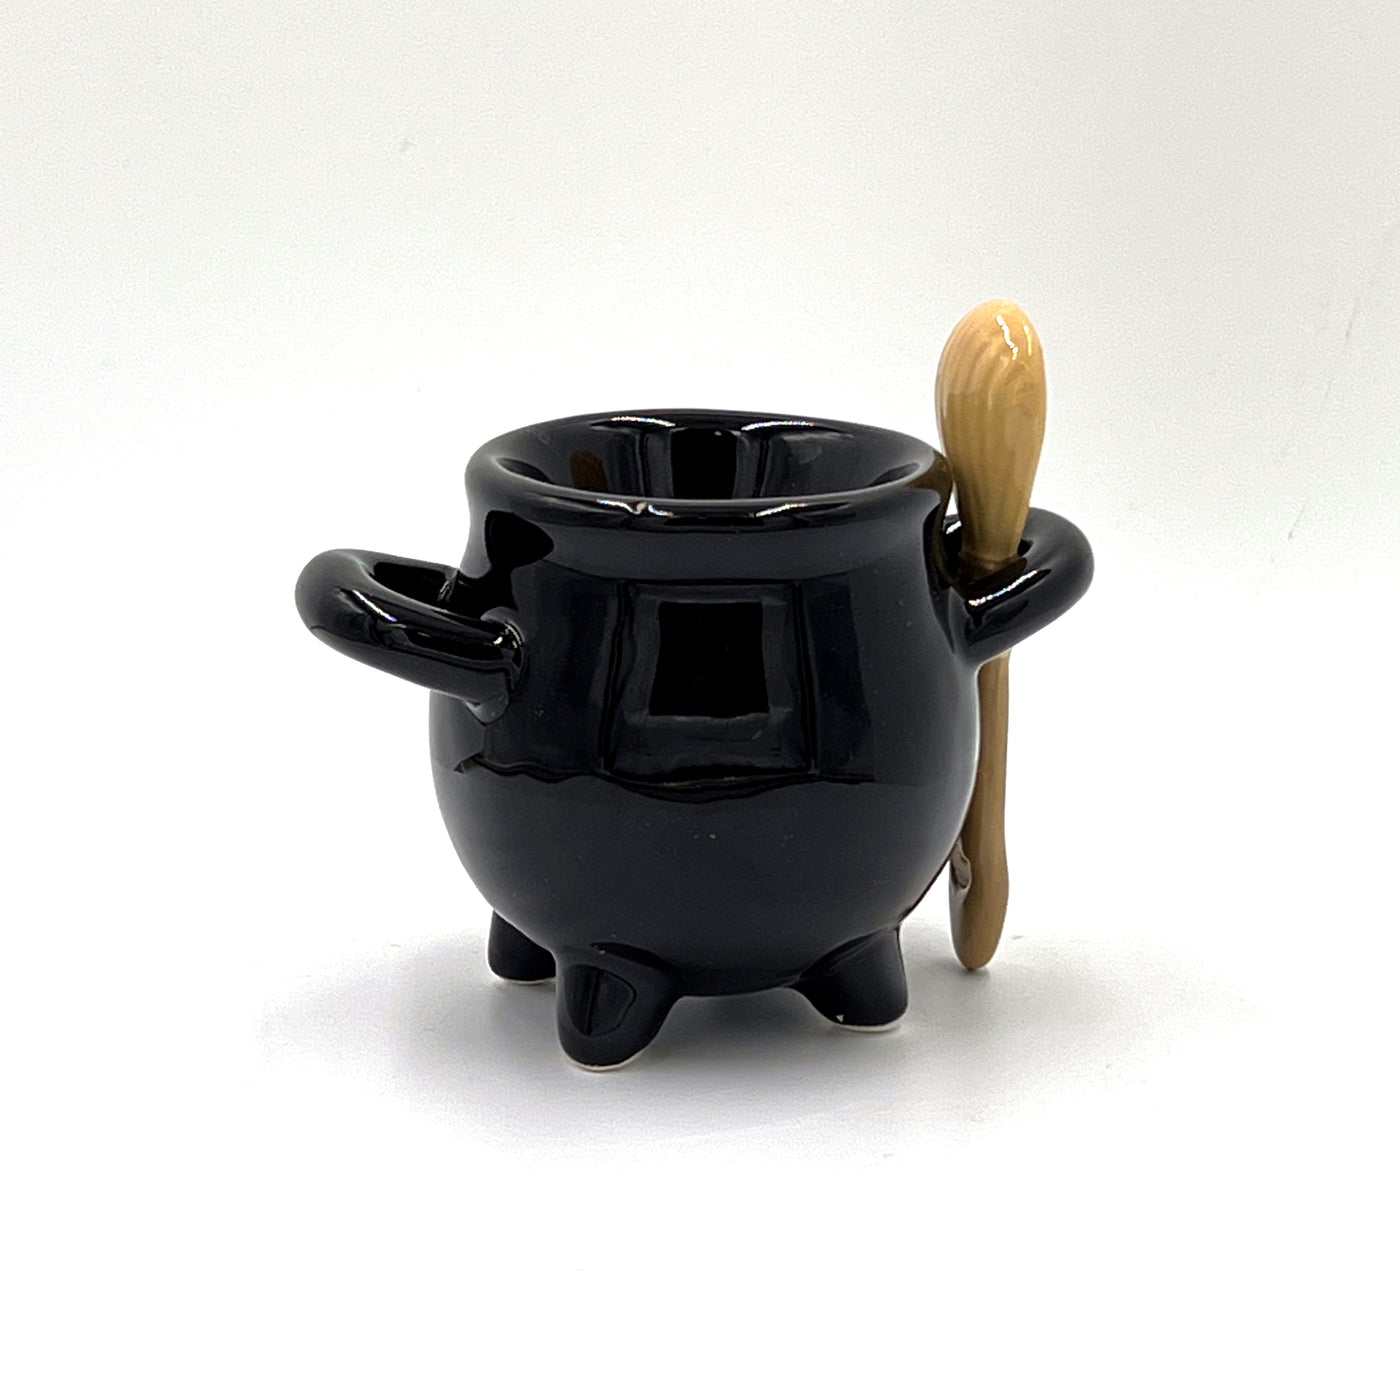 Cauldron Egg Cup with Broom Spoon - TwoBeeps.co.uk